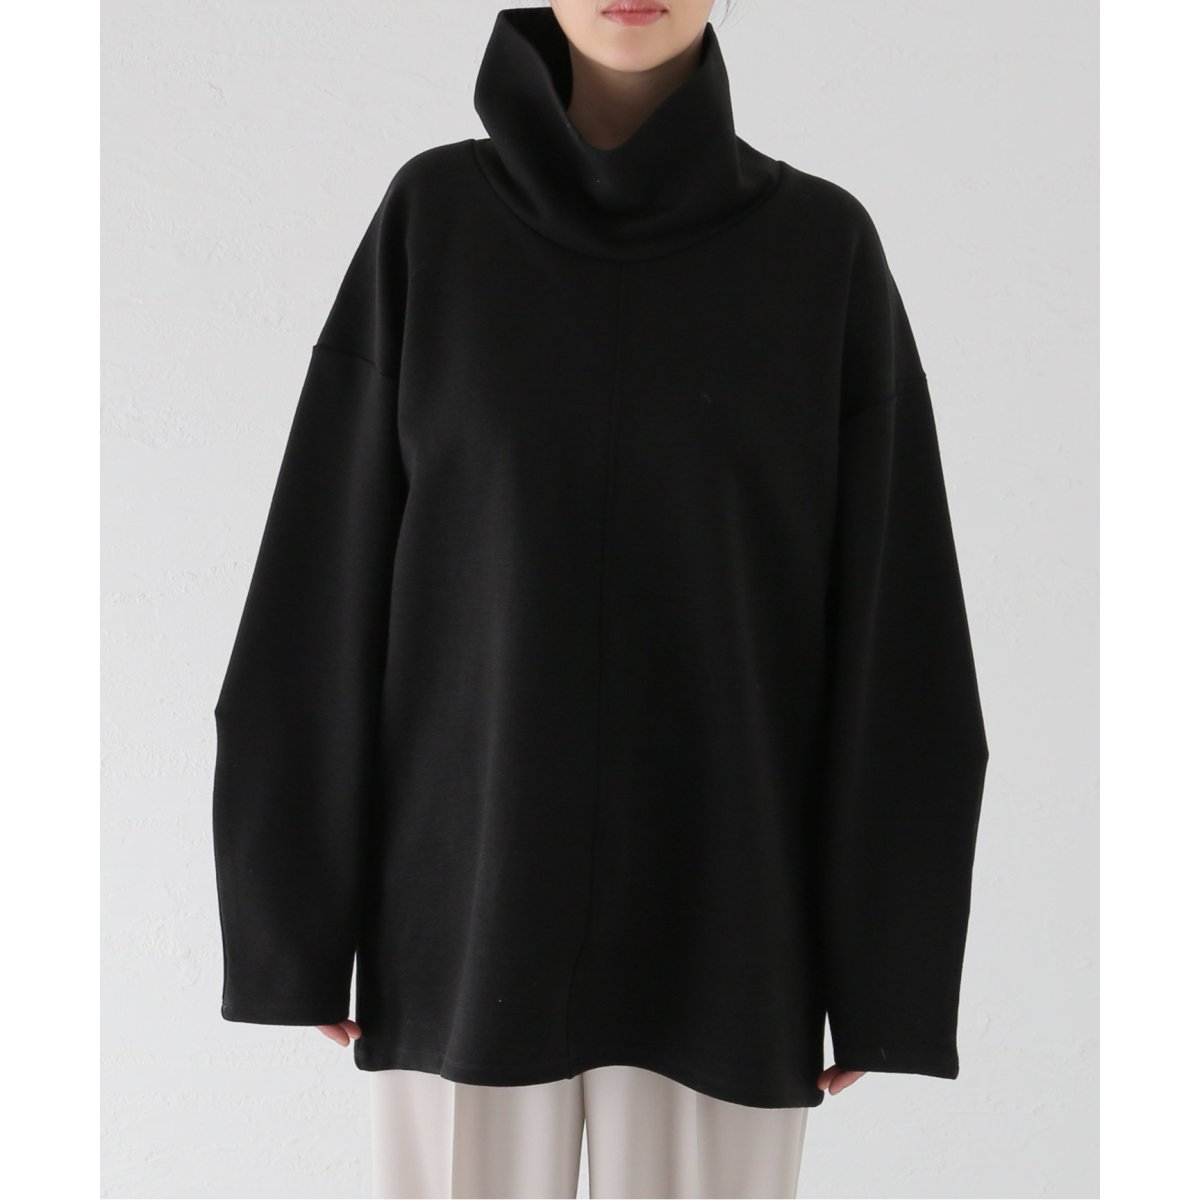 CLANE/クラネ】STAND NECK WIDE TOPS:カットソー | ジャーナル ...